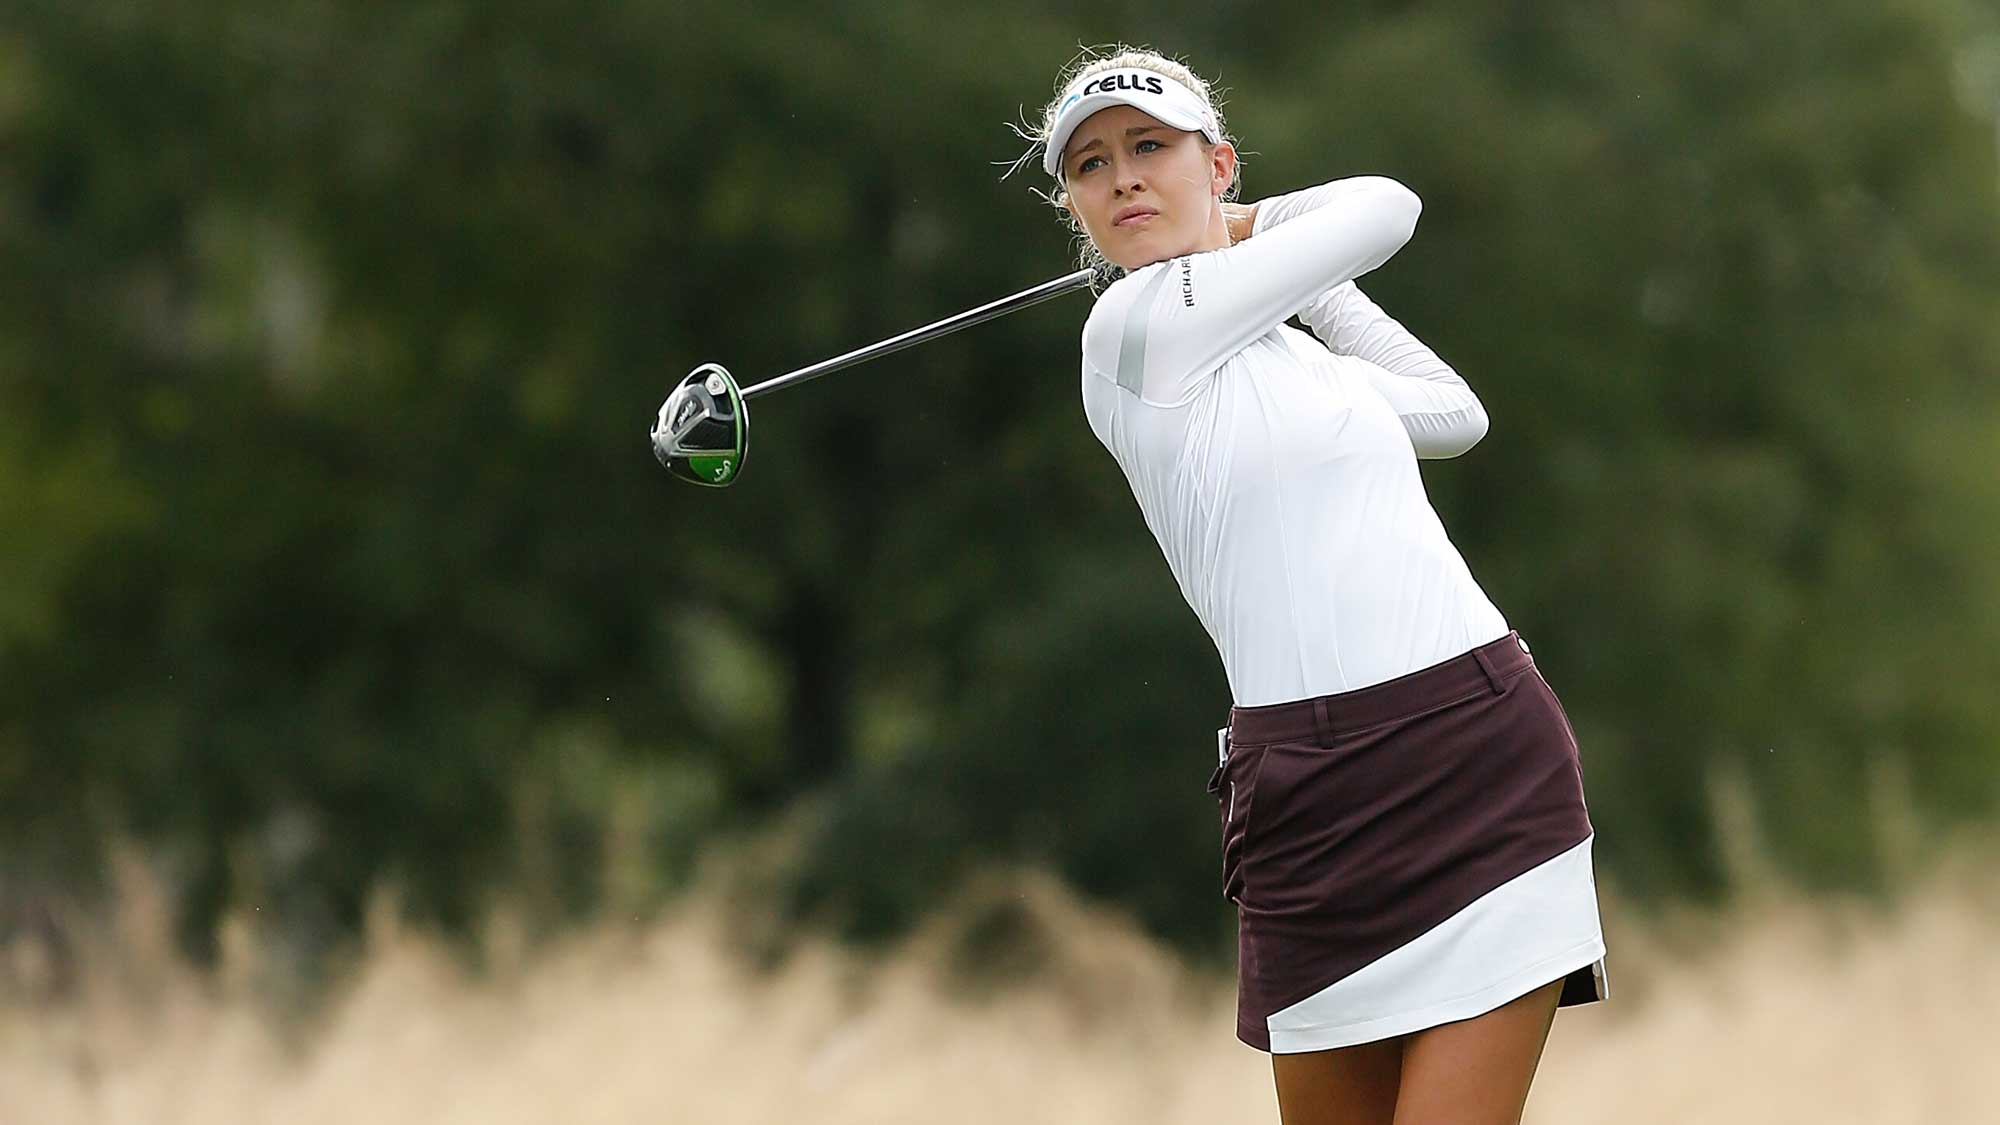 Nelly Korda Two Back At CME Tour Championship | Dog Leg News